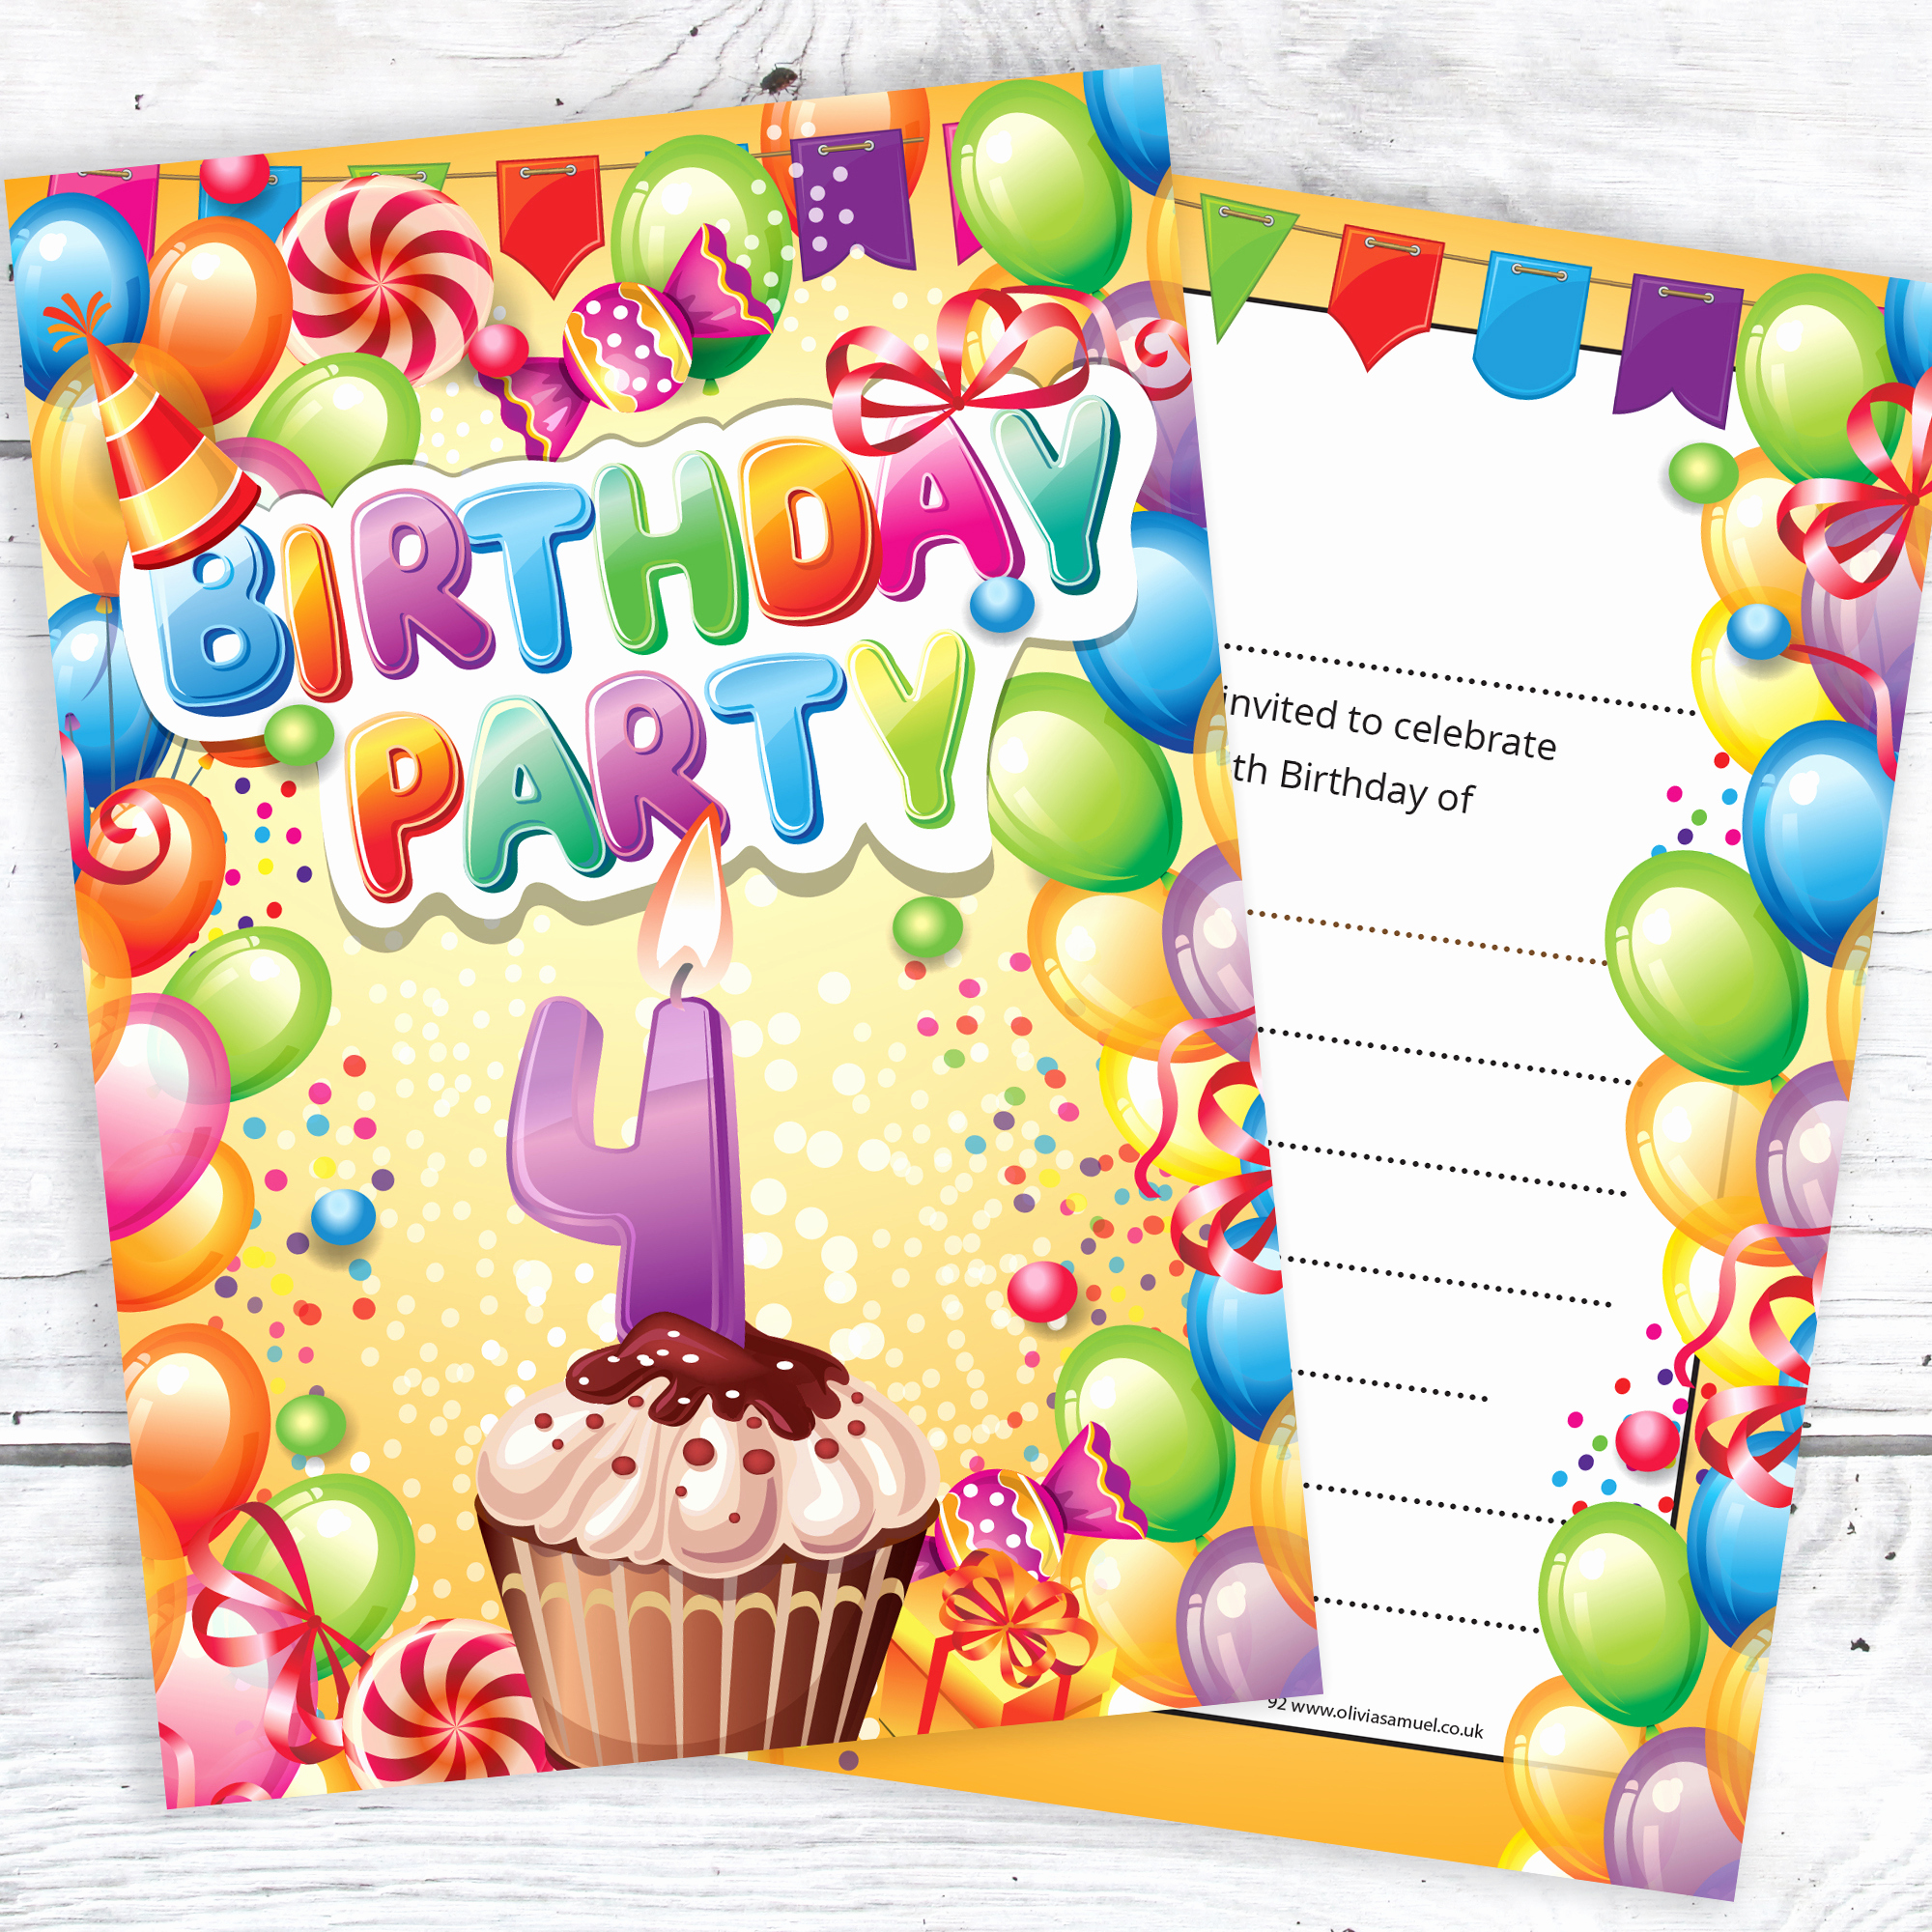 5th Birthday Party Invitation Awesome Children’s 4th Birthday Party Invites – Boy or Girl Bright